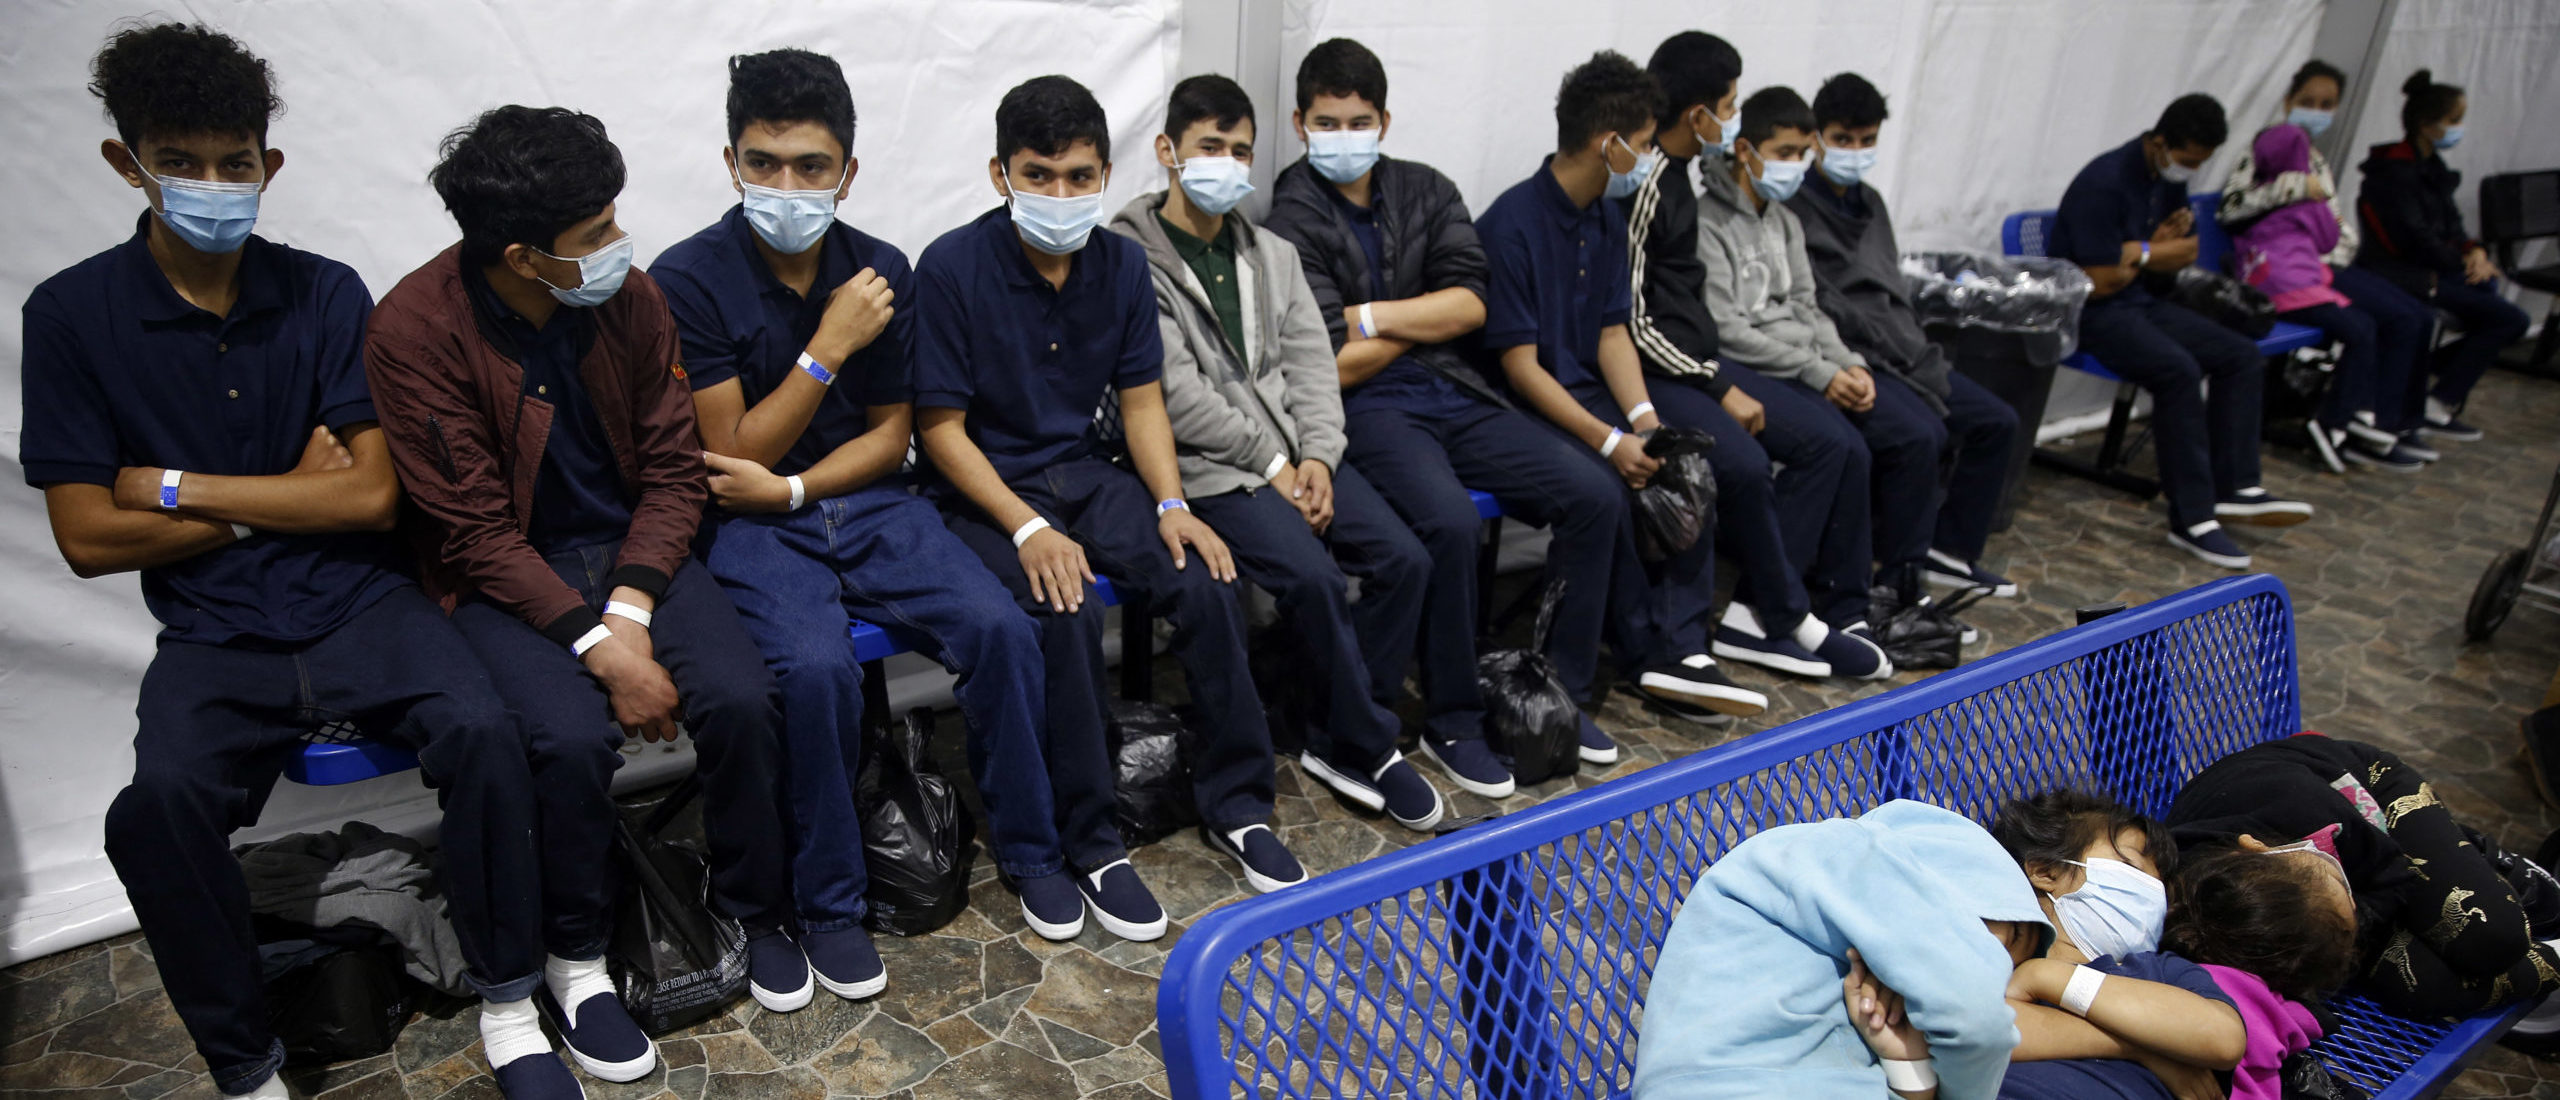 Young unaccompanied migrants, wait for their turn at the secondary processing station inside the Donna Department of Homeland Security holding facility, the main detention center for unaccompanied children in the Rio Grande Valley in Donna, Texas on March 30, 2021. - The Biden administration on Tuesday for the first time allowed journalists inside its main detention facility at the border for migrant children, revealing a severely overcrowded tent structure where more than 4,000 kids and families were crammed into pods and the youngest kept in a large play pen with mats on the floor for sleeping. (Photo by Dario Lopez-Mills / POOL / AFP) (Photo by DARIO LOPEZ-MILLS/POOL/AFP via Getty Images)